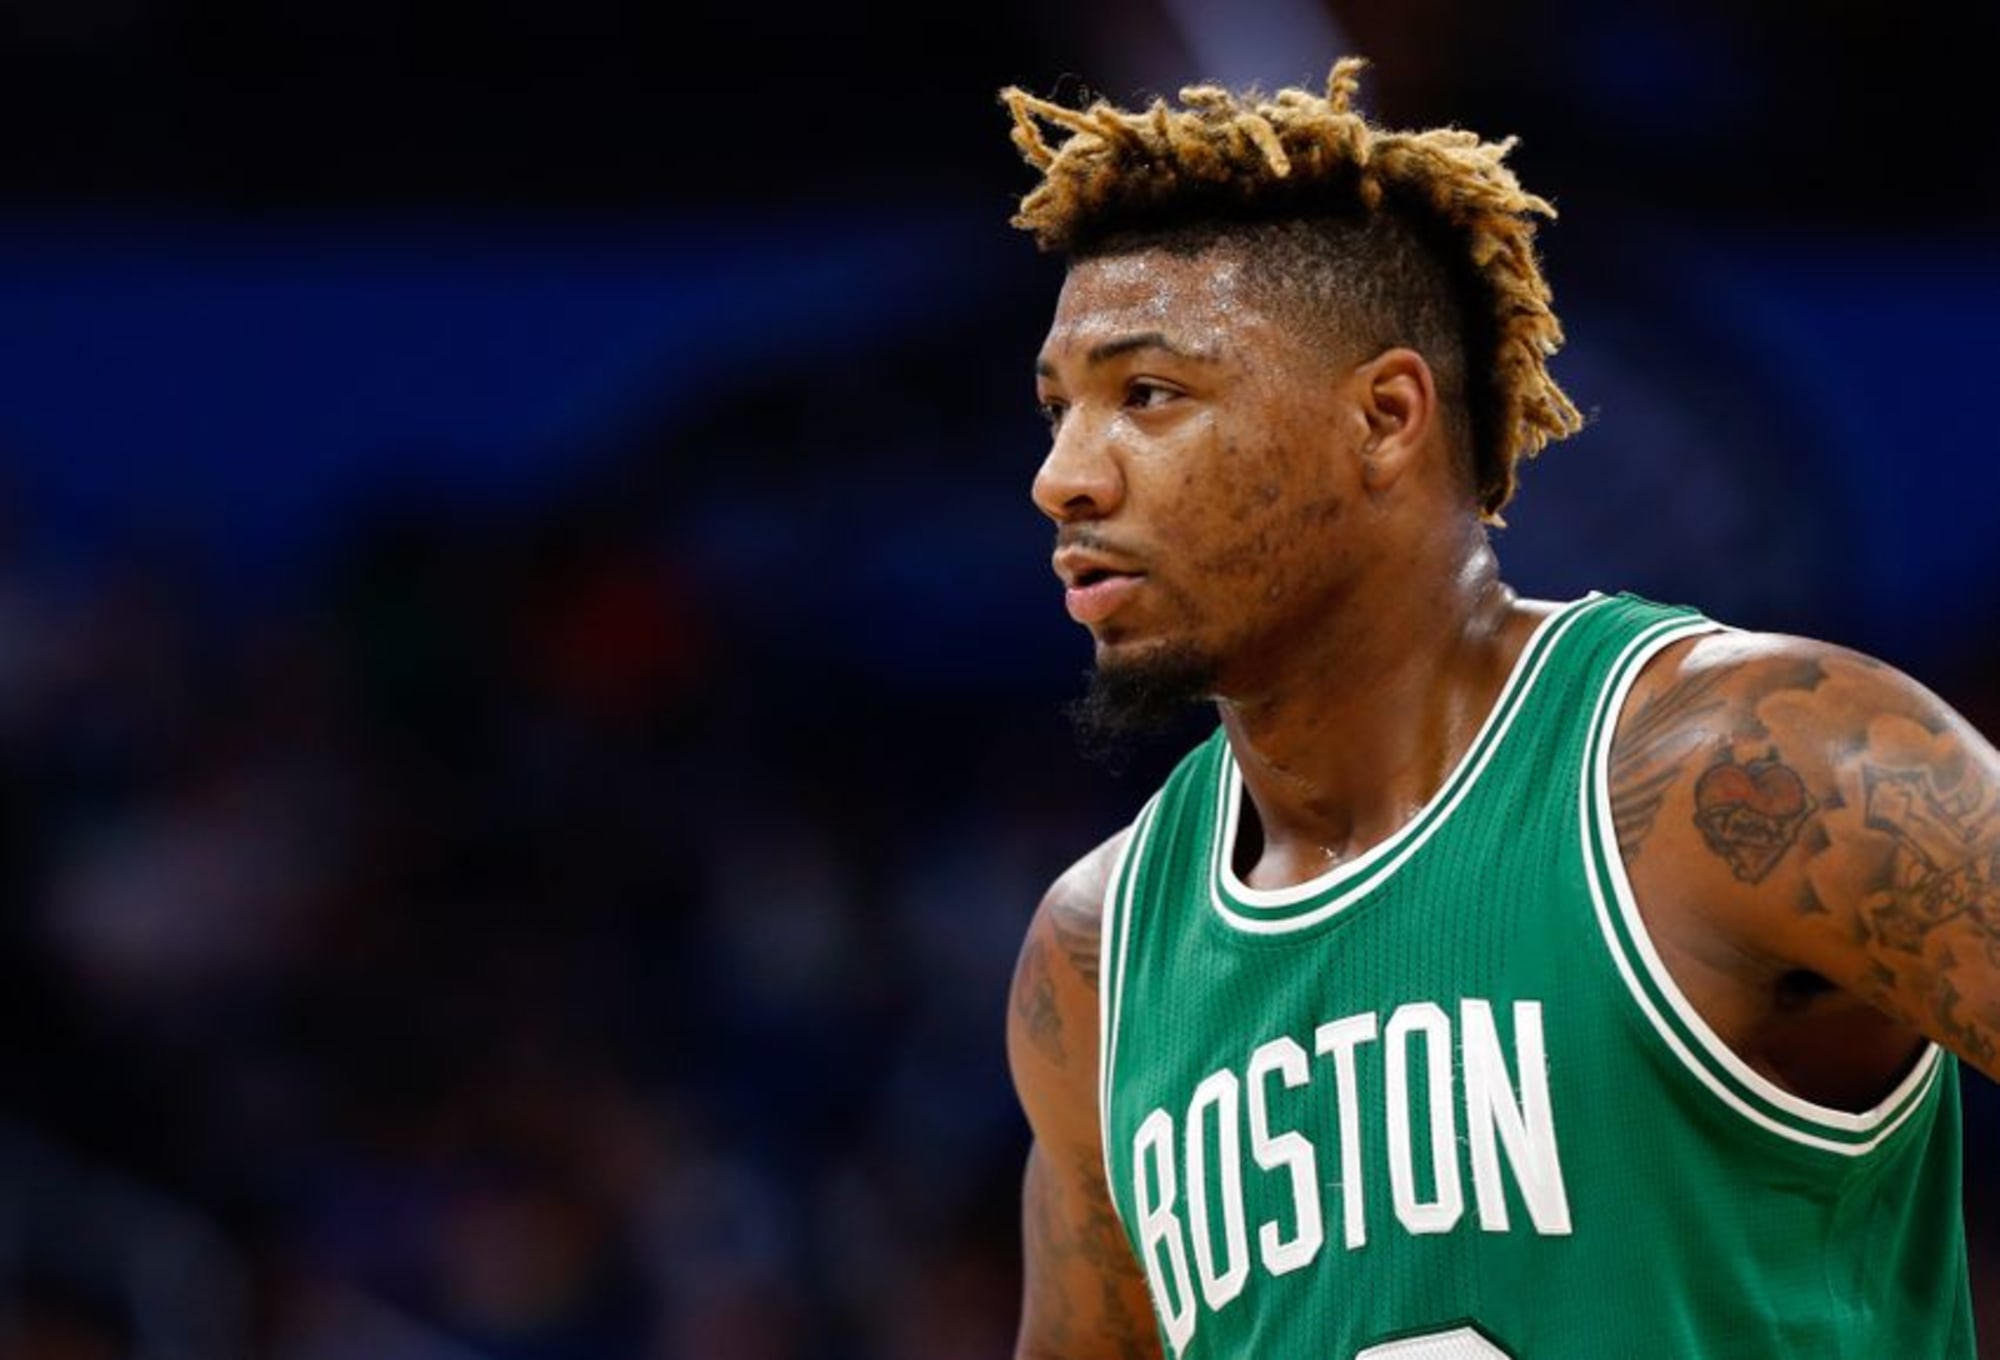 NBA Trade Rumors: 76ers Should Have Traded Okafor for Marcus Smart